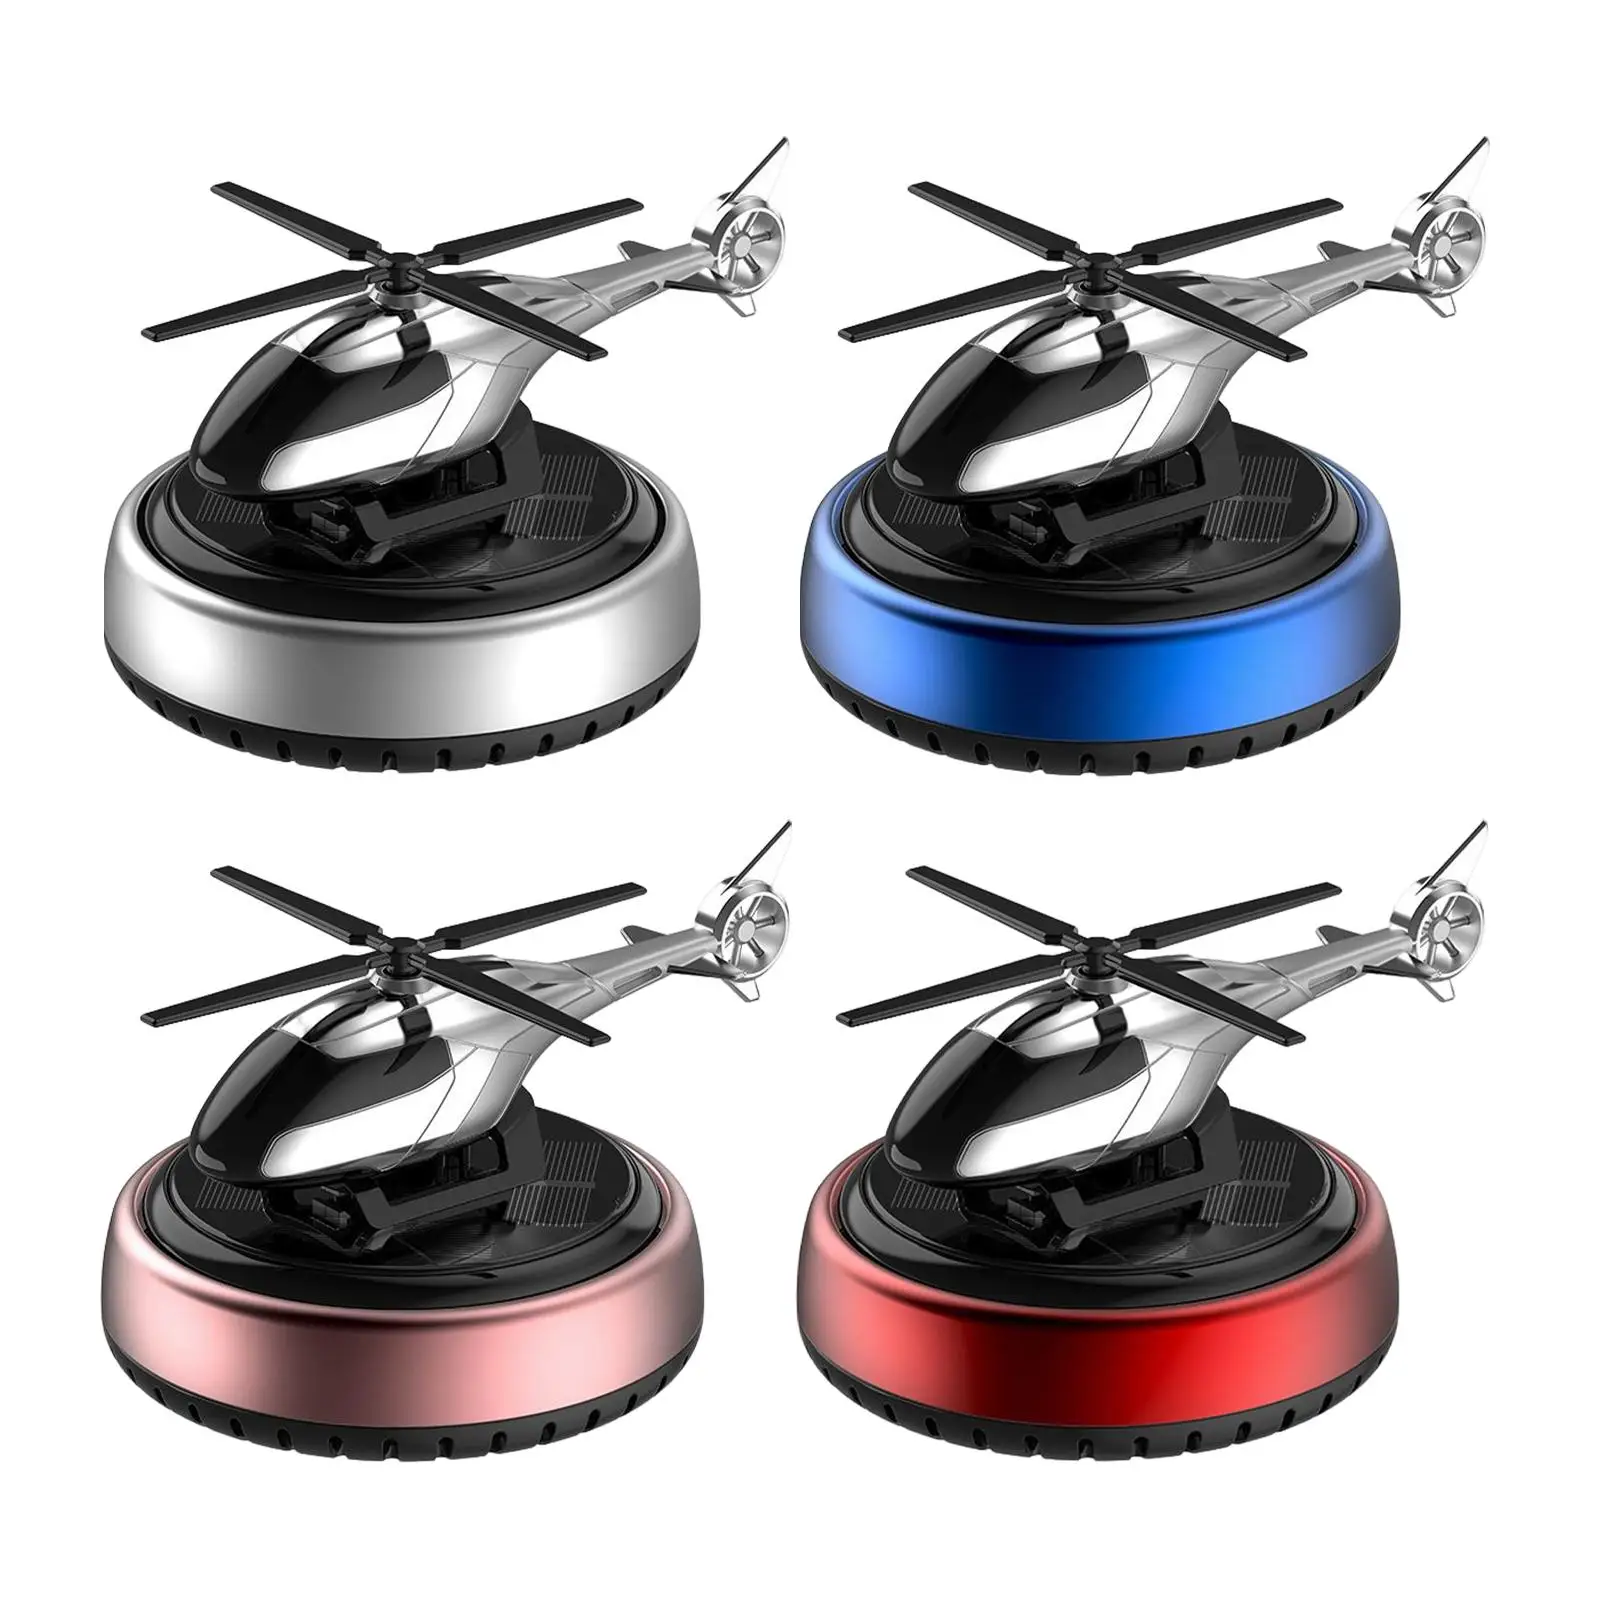 Rotating  Air Freshener  Ornaments Perfume Accessories Solar   Model  Diffuser Helicopter for Car Gifts